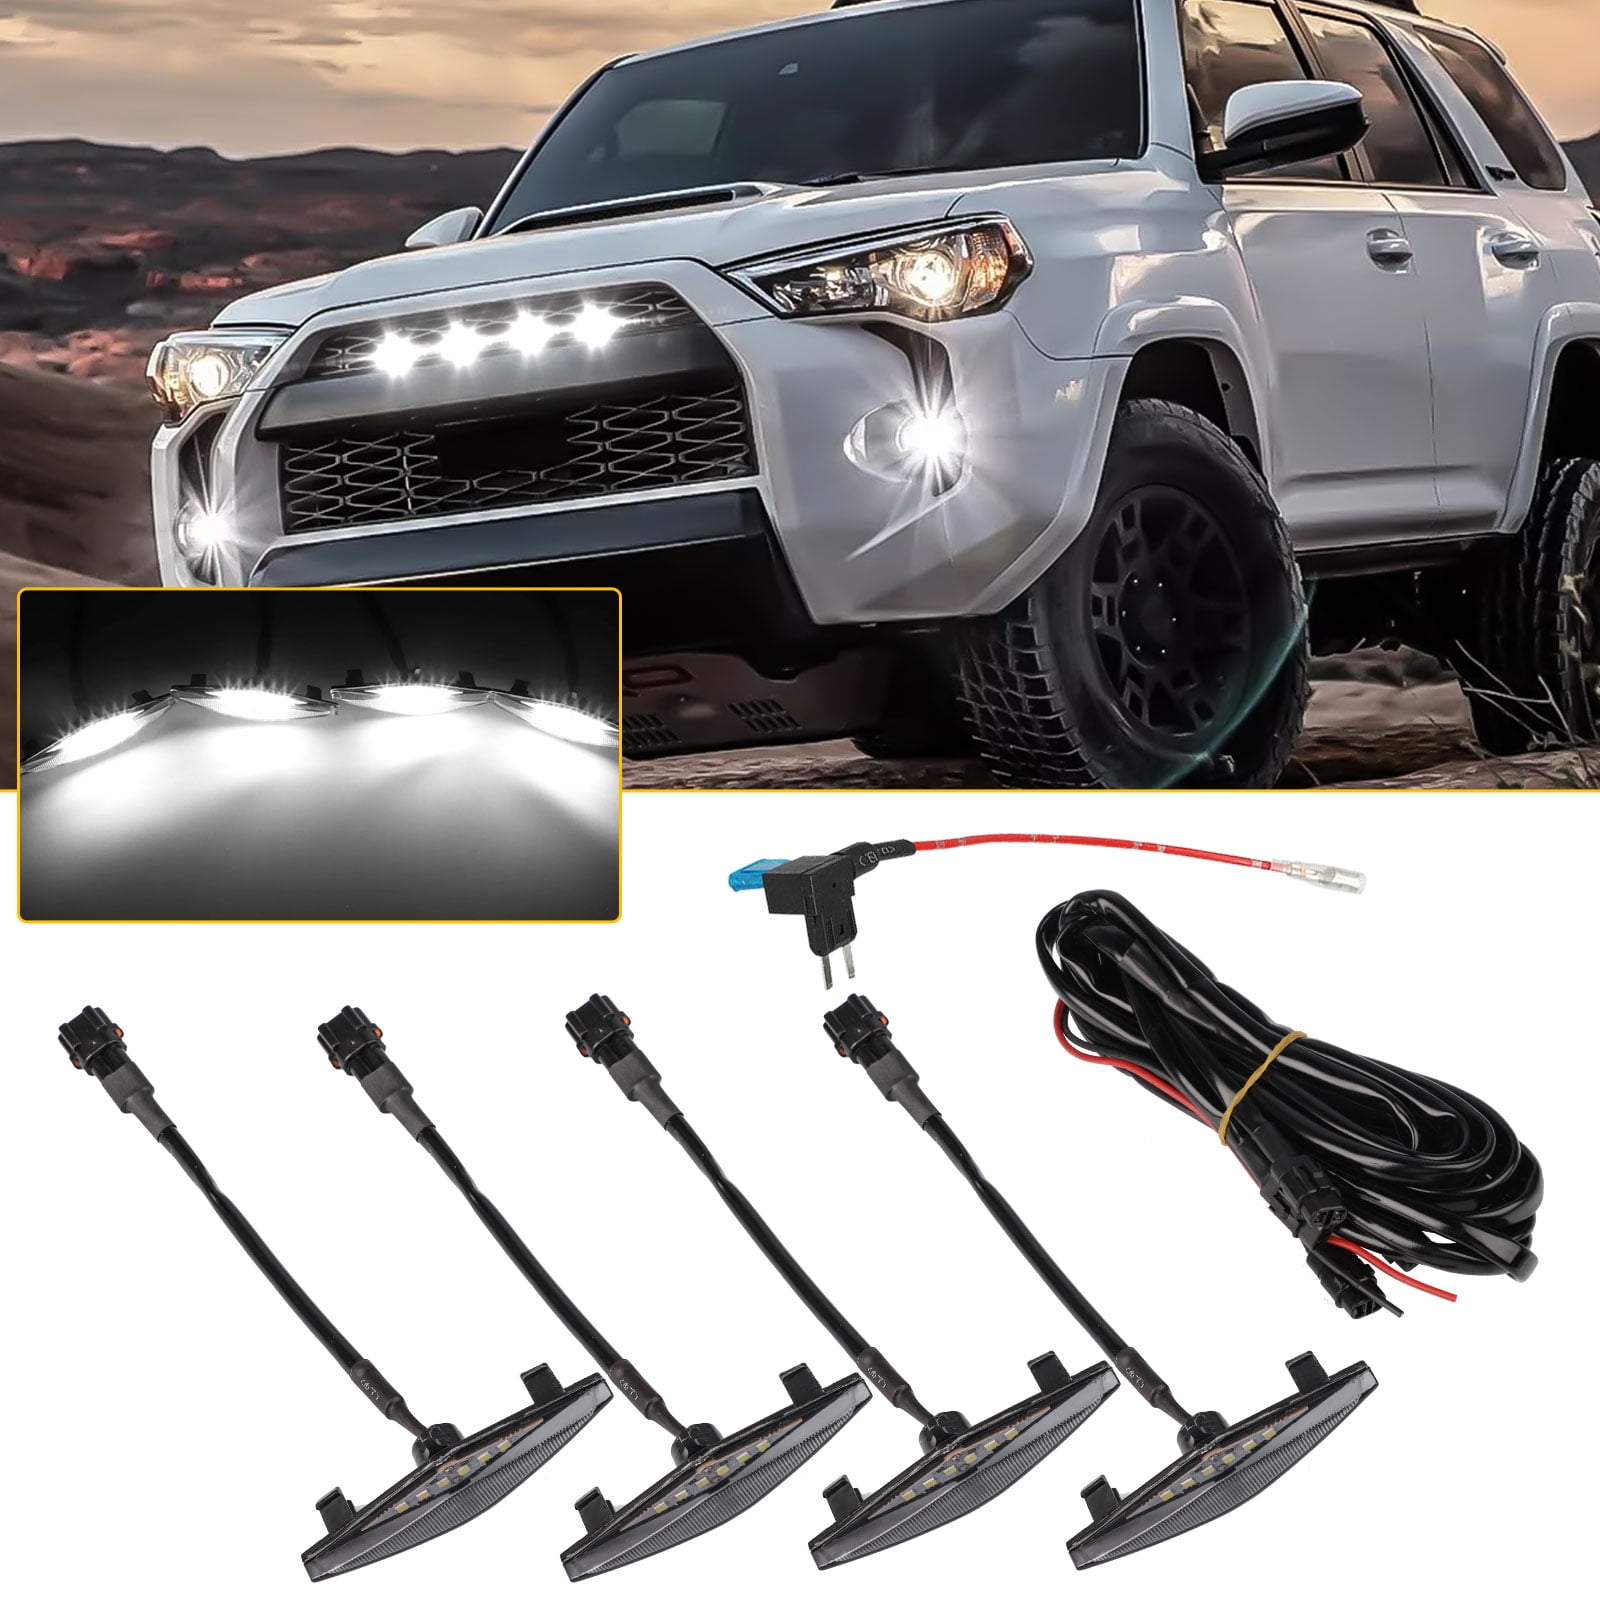 Amber Lights Trd Pro Grill Compatible with 4runner Trd Pro 2014 2015 2016 2017 2018 2019 Replacement Black Grille with Letters 4 White LED Lights Matte Black 